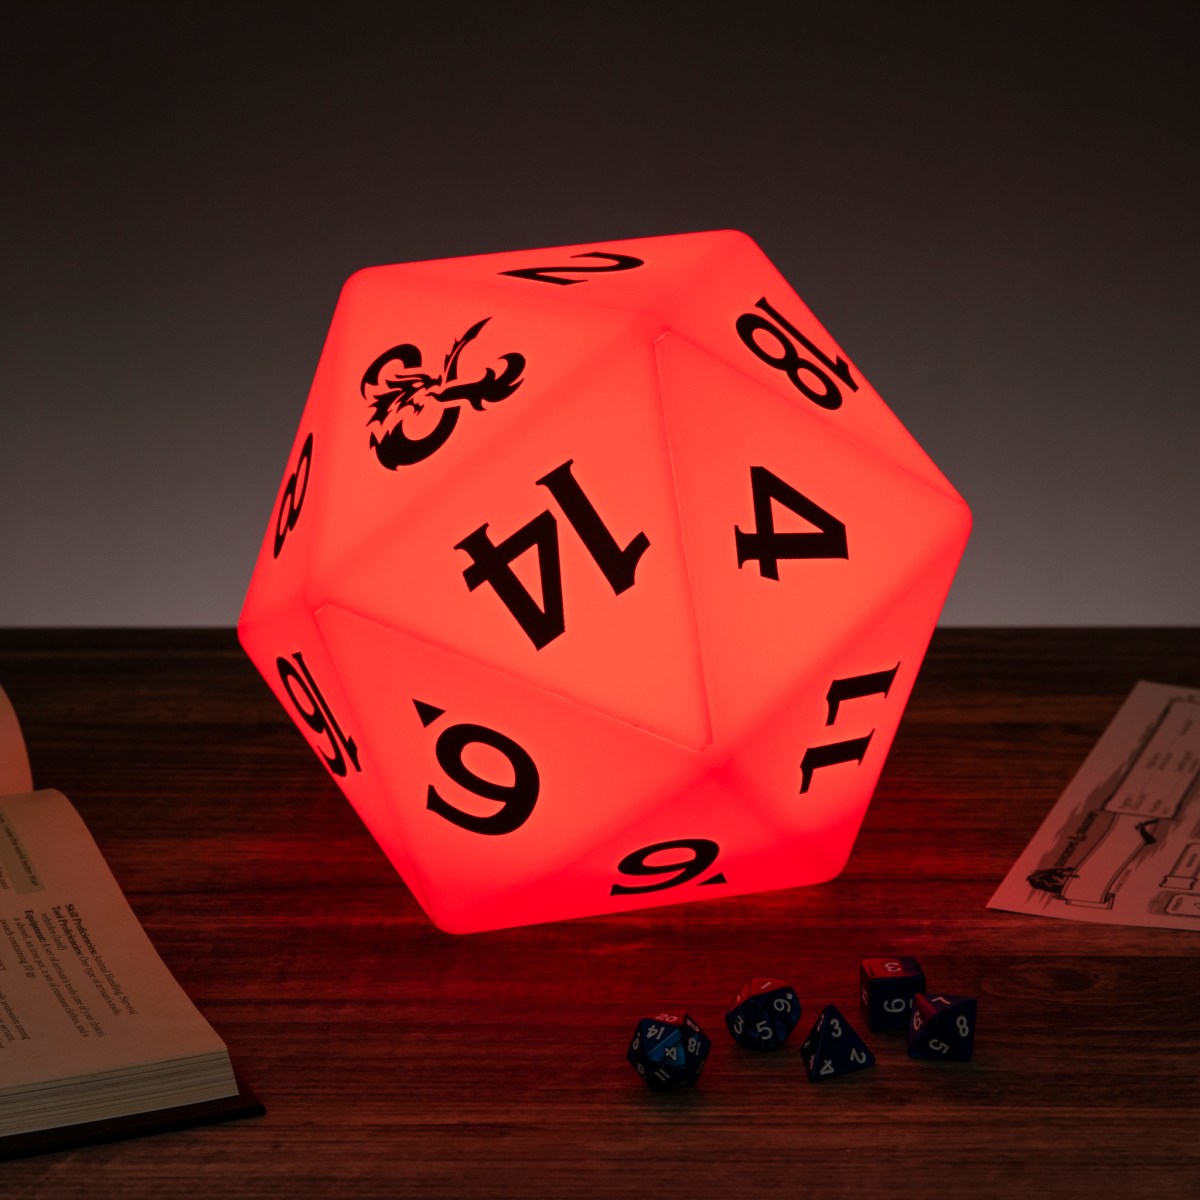 A D&D color-changing light shaped like a D20